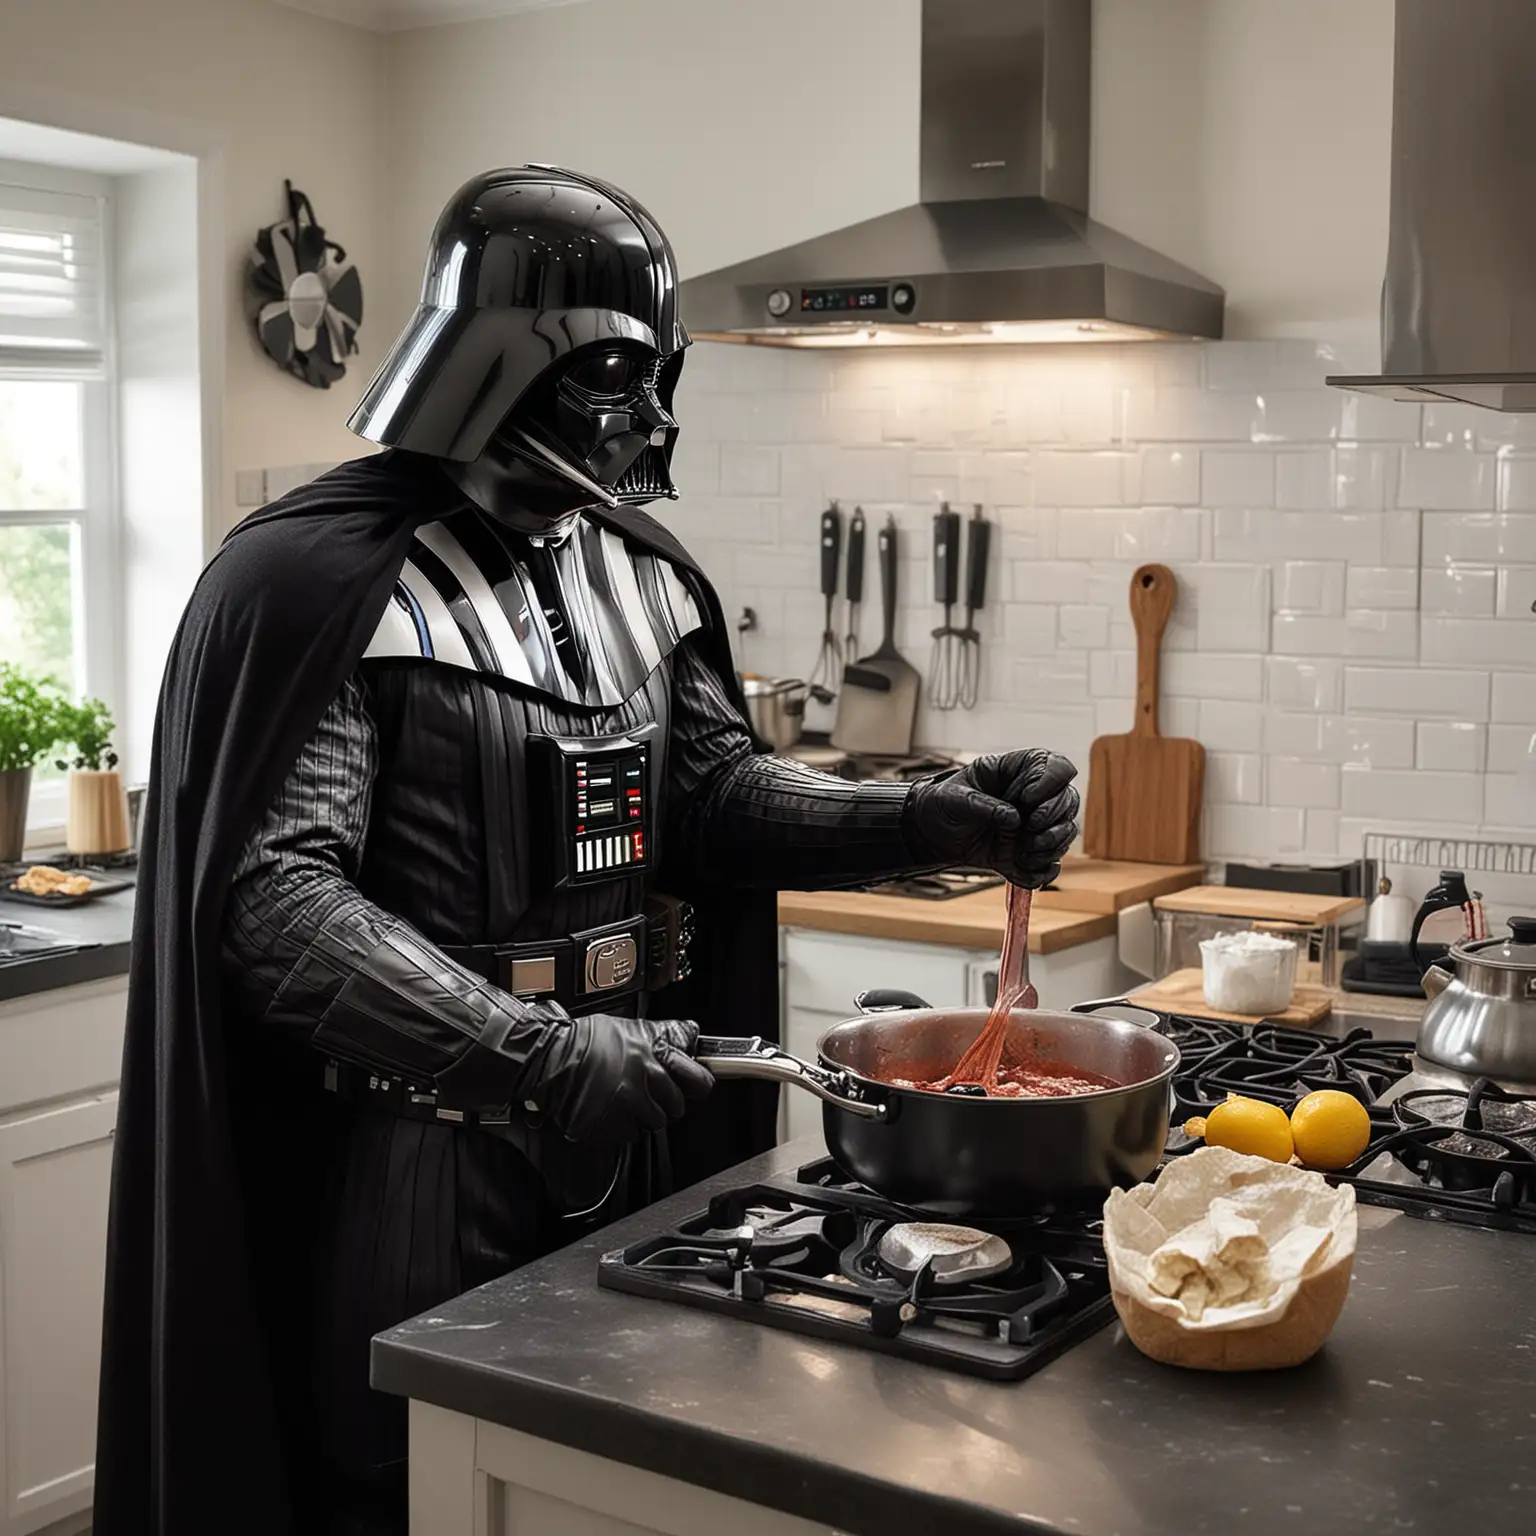 Darth Vader cooking in the kitchen